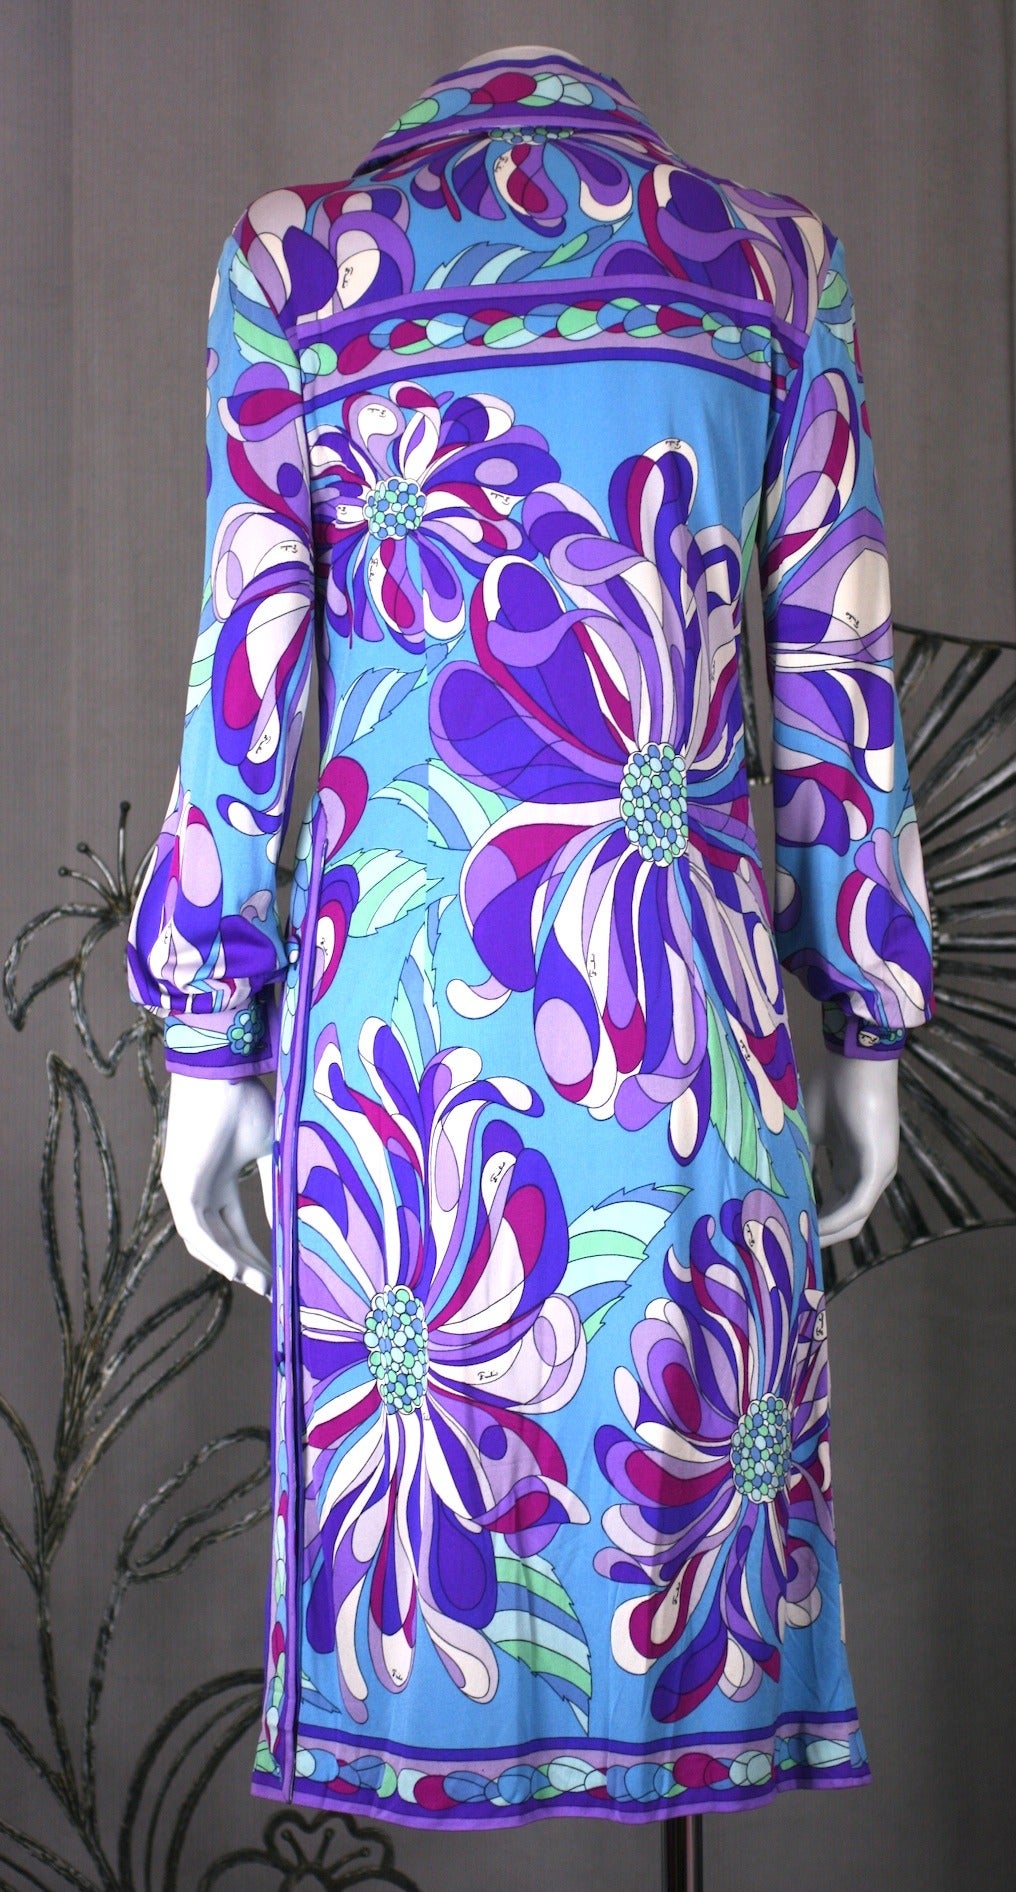 Emilio Pucci Side Slit Shirtwaist In Excellent Condition For Sale In New York, NY